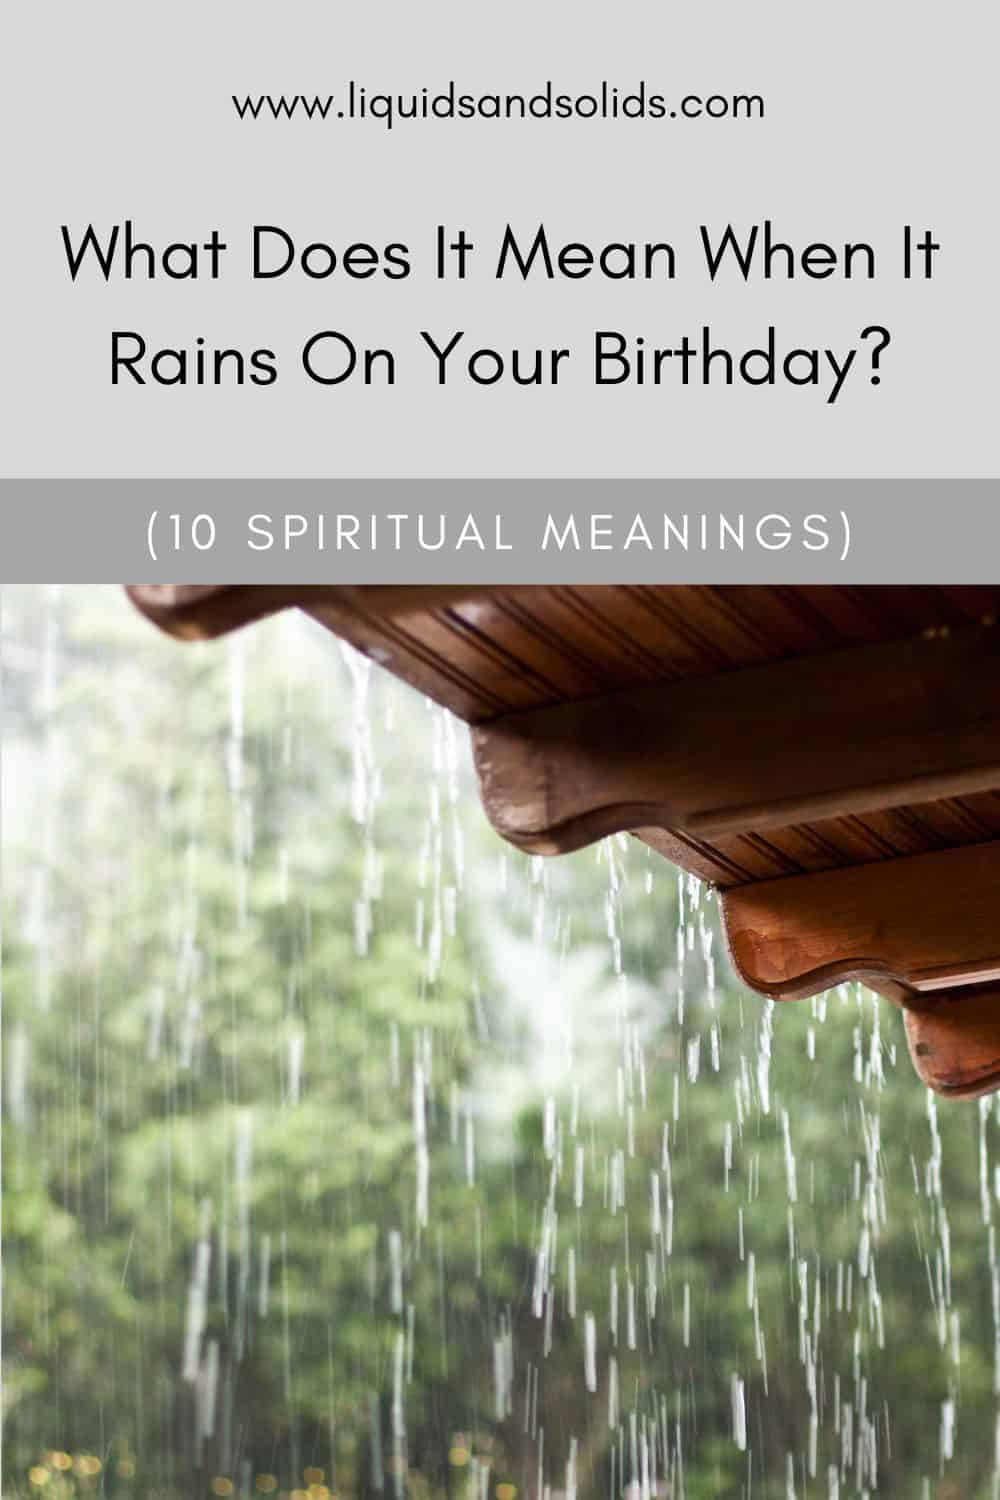 What Does It Mean When It Rains On Your Birthday? (10 Spiritual Meanings)